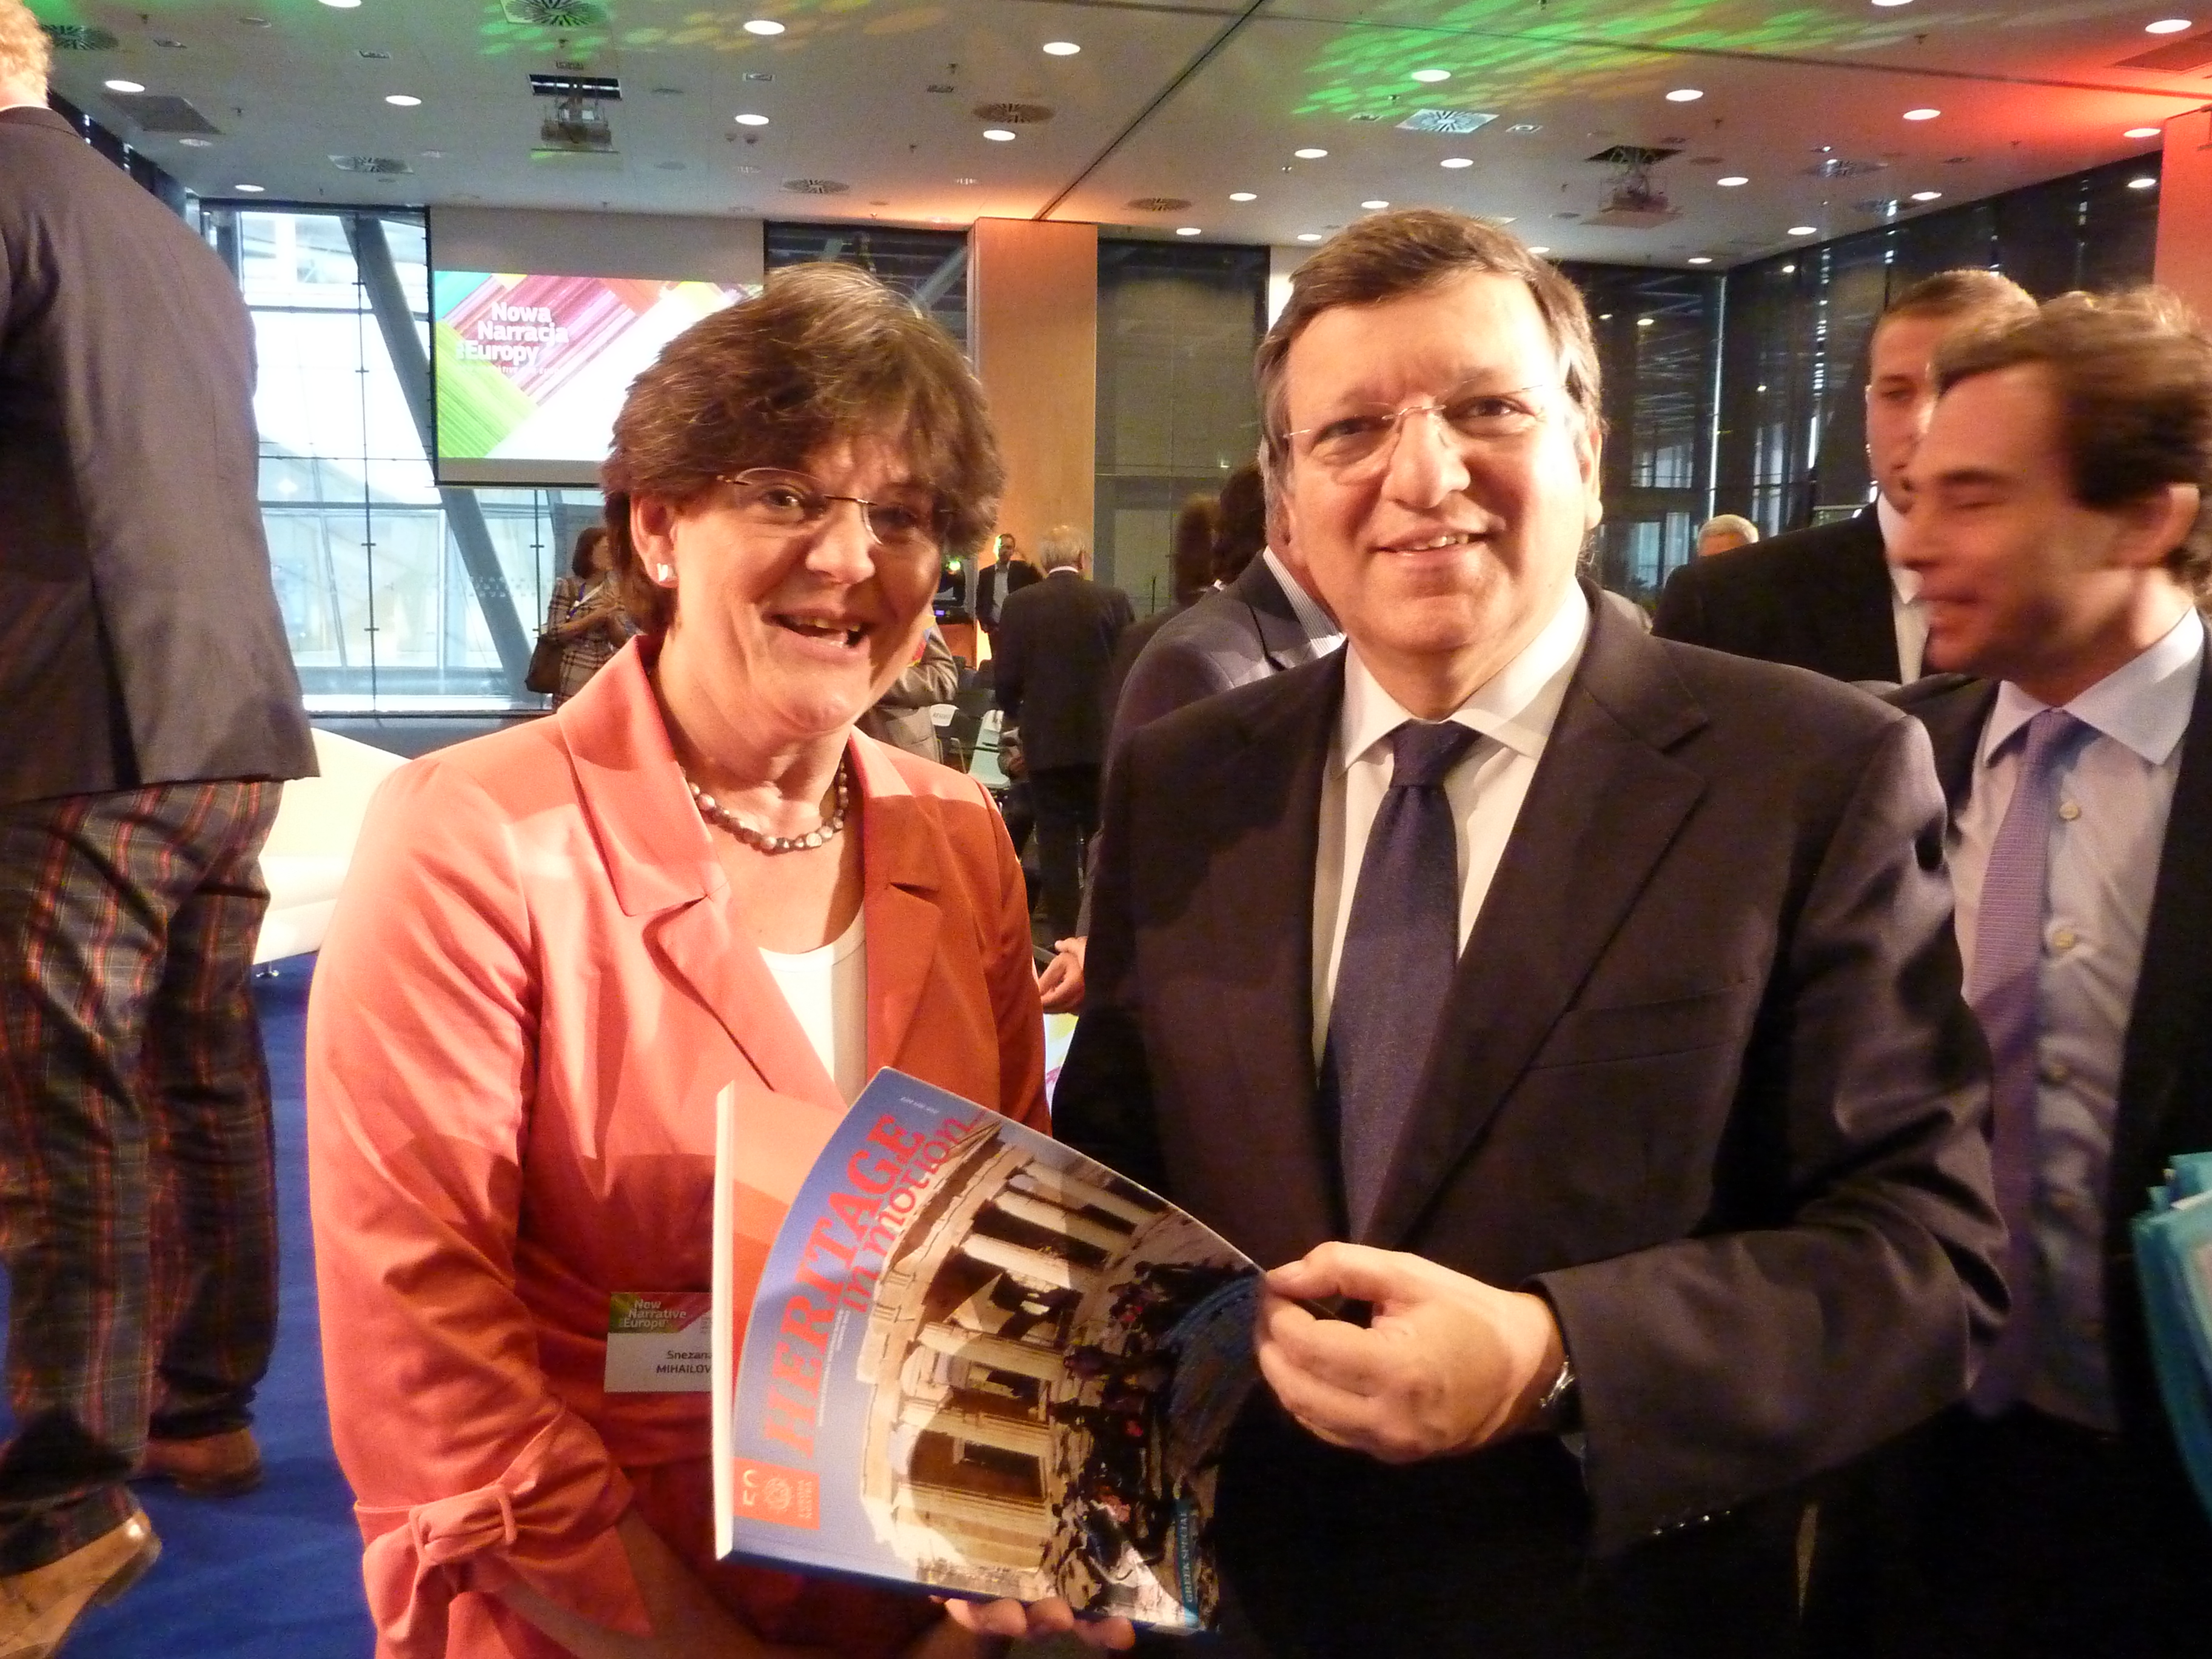 Photo: President Barroso receives a copy of Heritage in Motion. © Winand Quaedvlieg